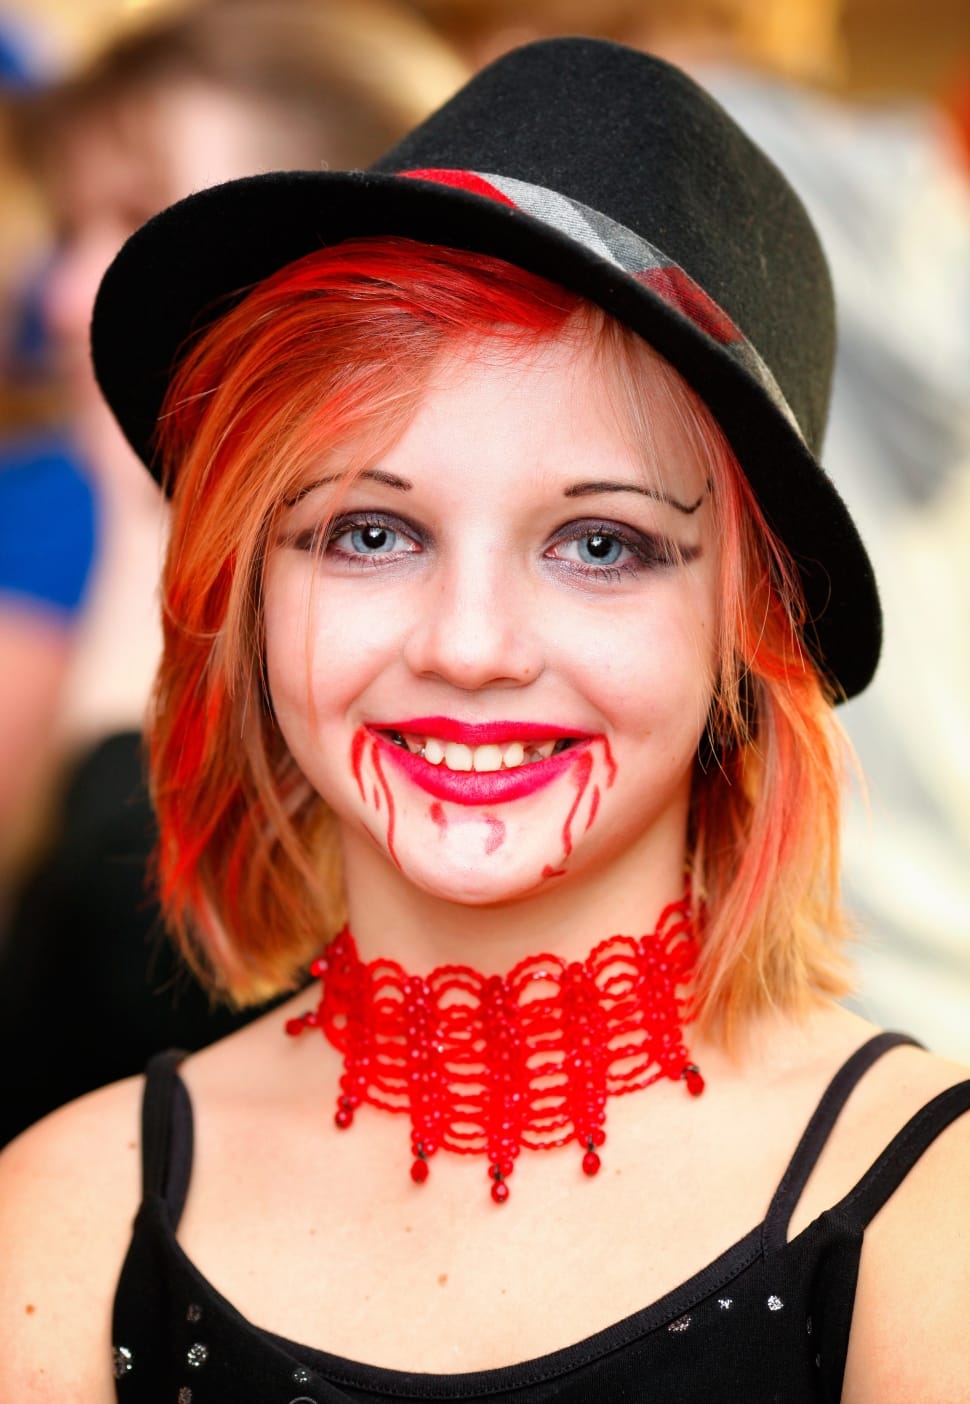 woman wearing black hat and red choker during daytime preview